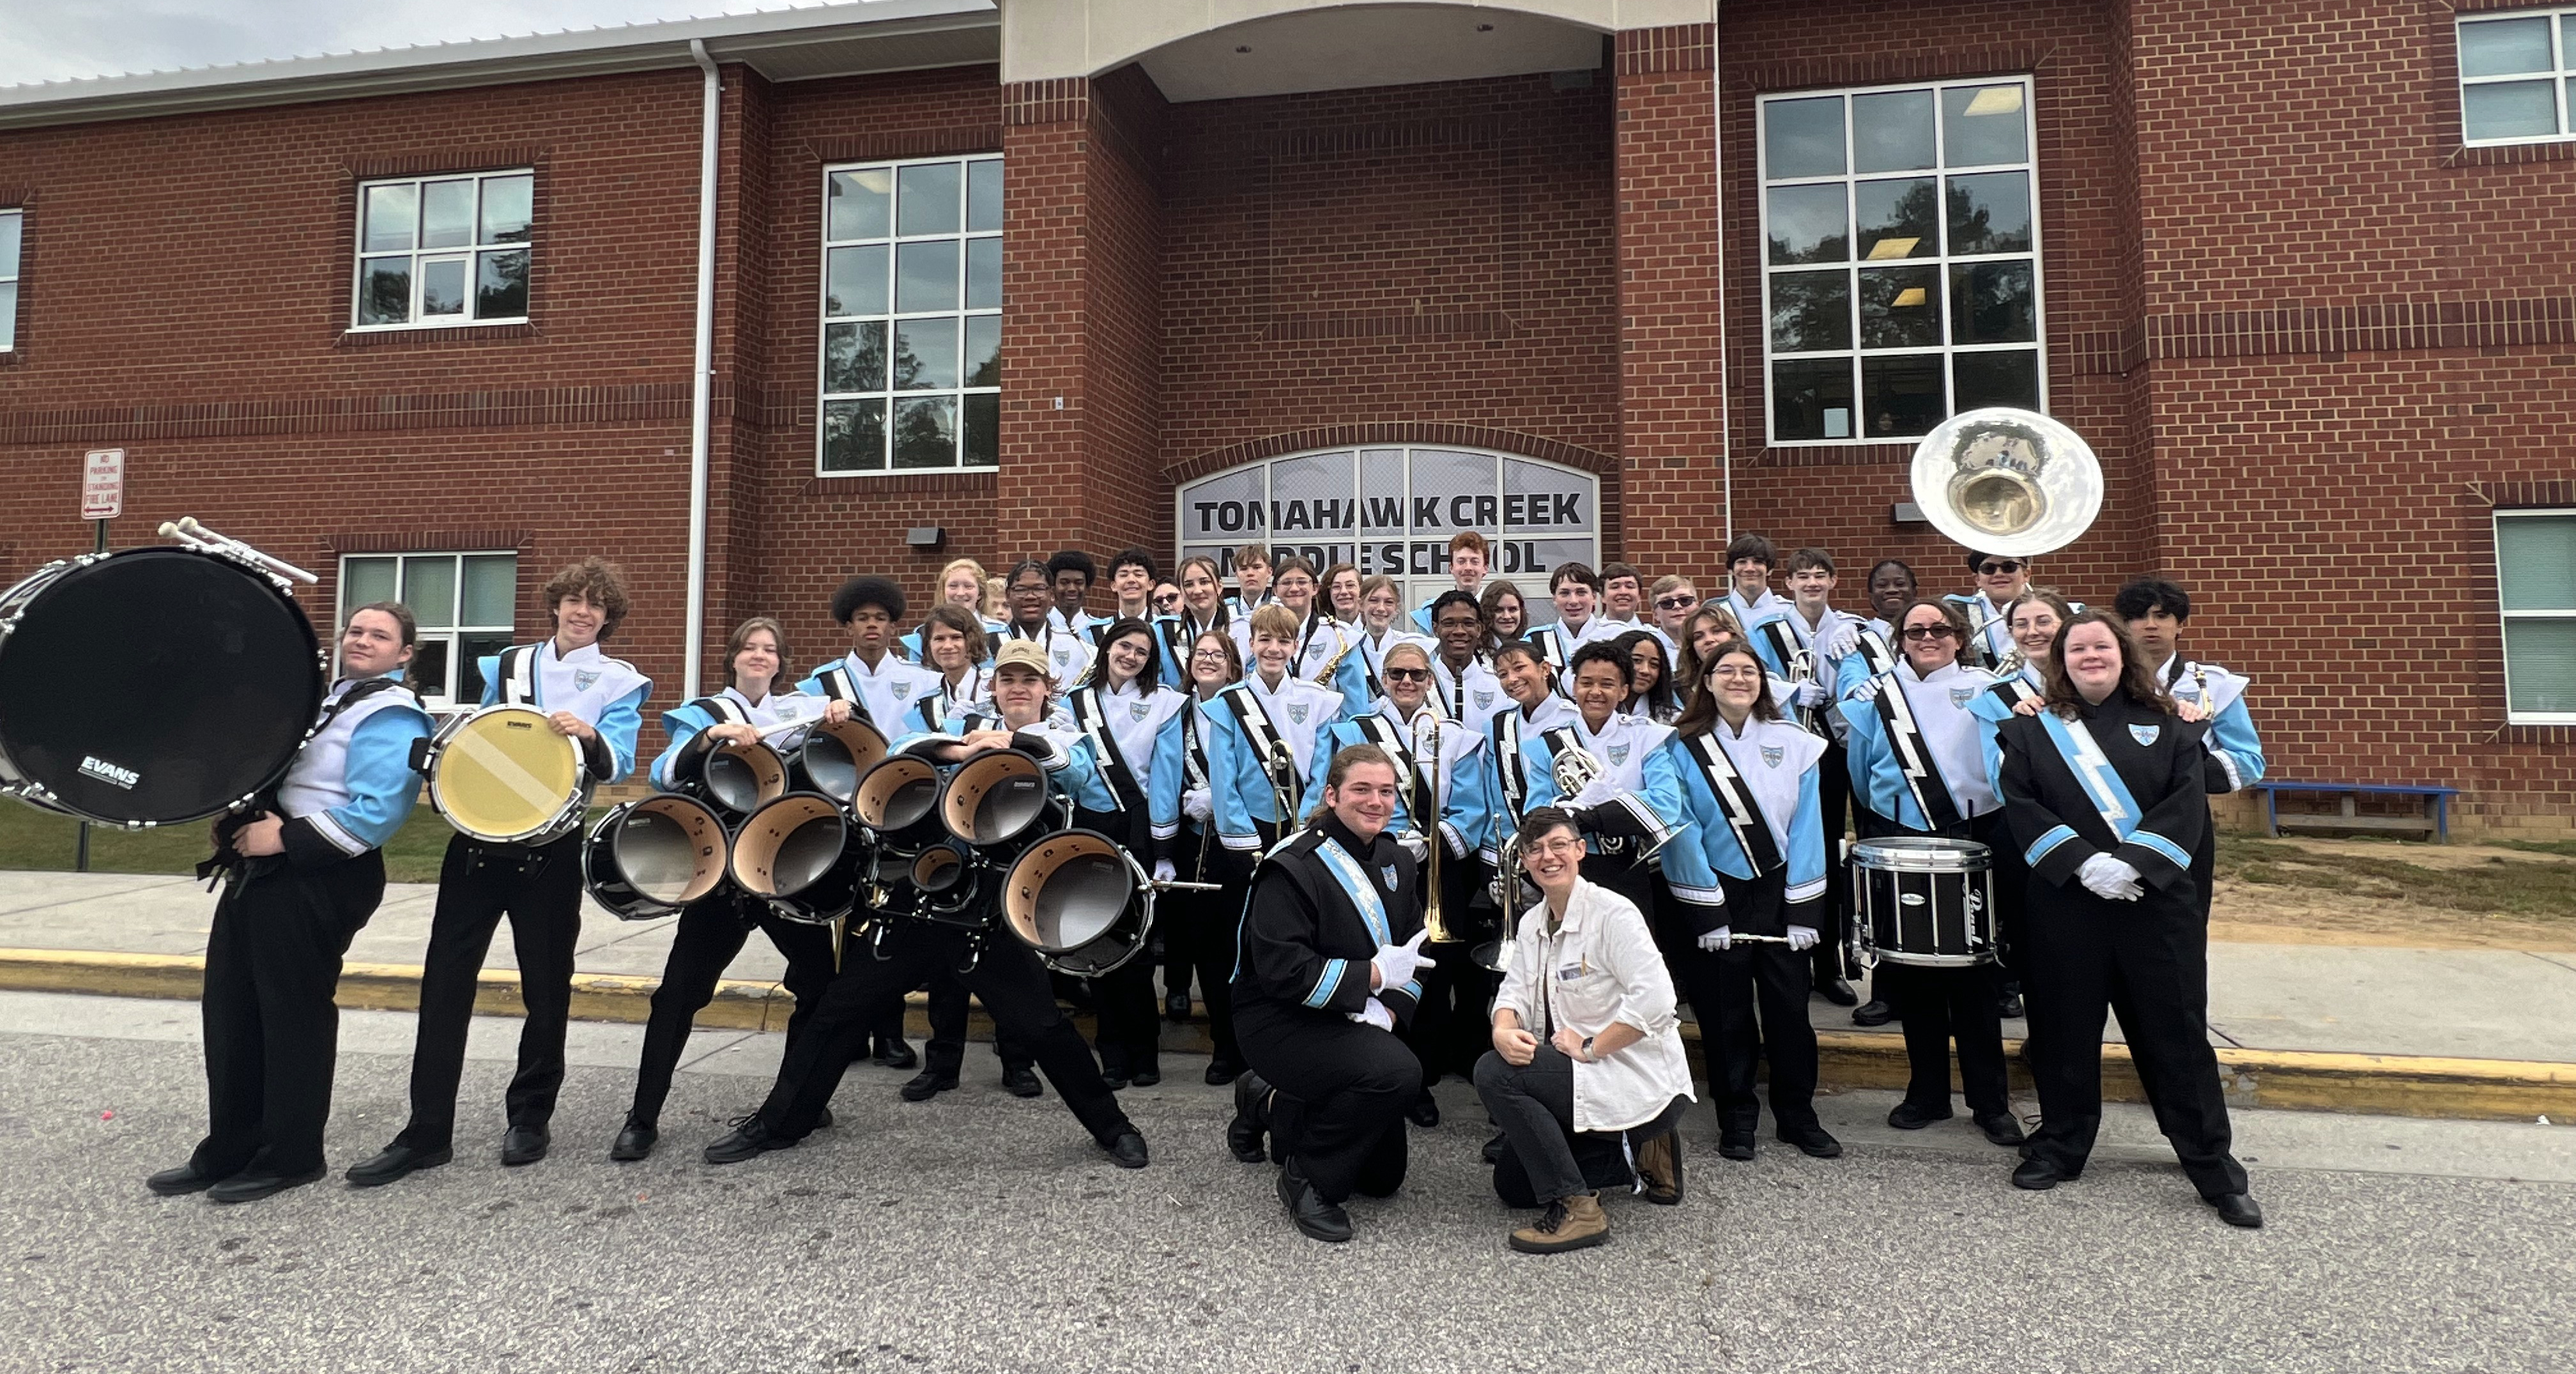 Marching band poses in front of the school building for a photo